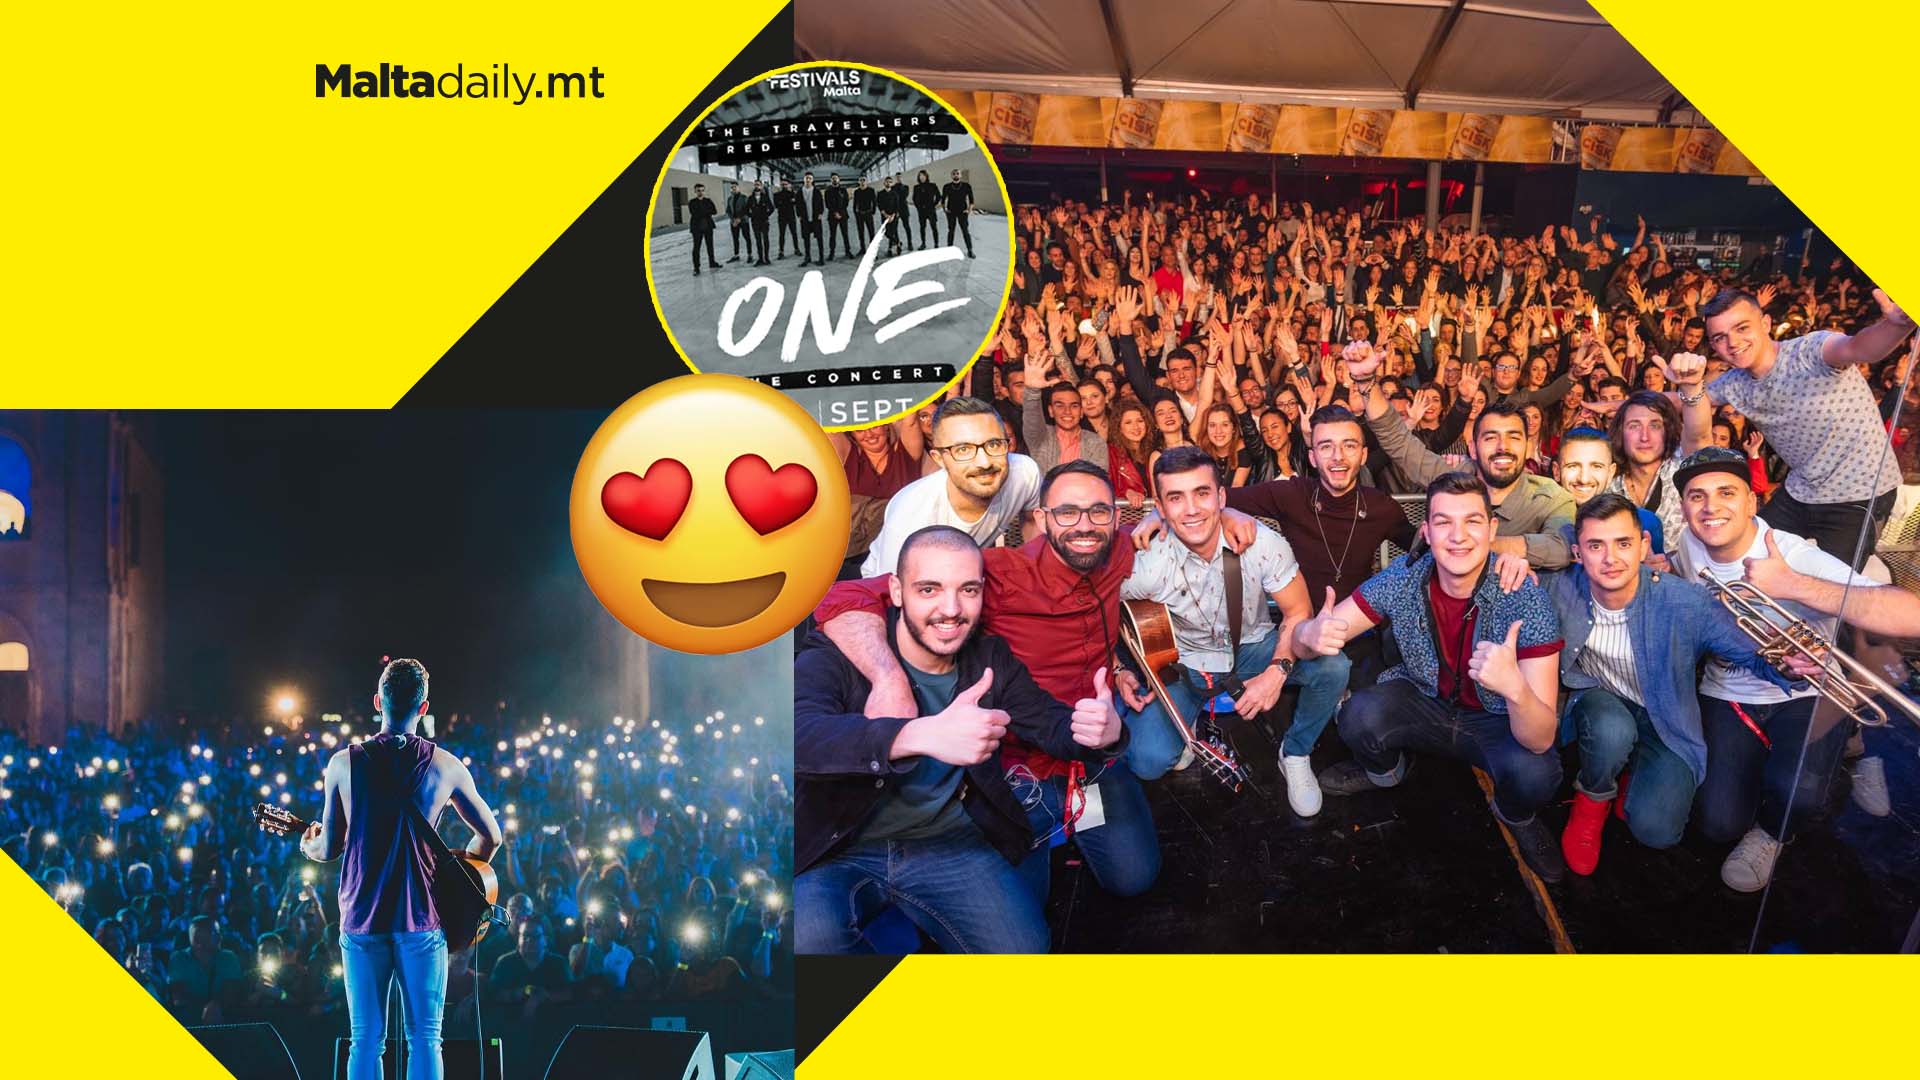 Two of Malta's biggest bands uniting for ONE extraordinary concert